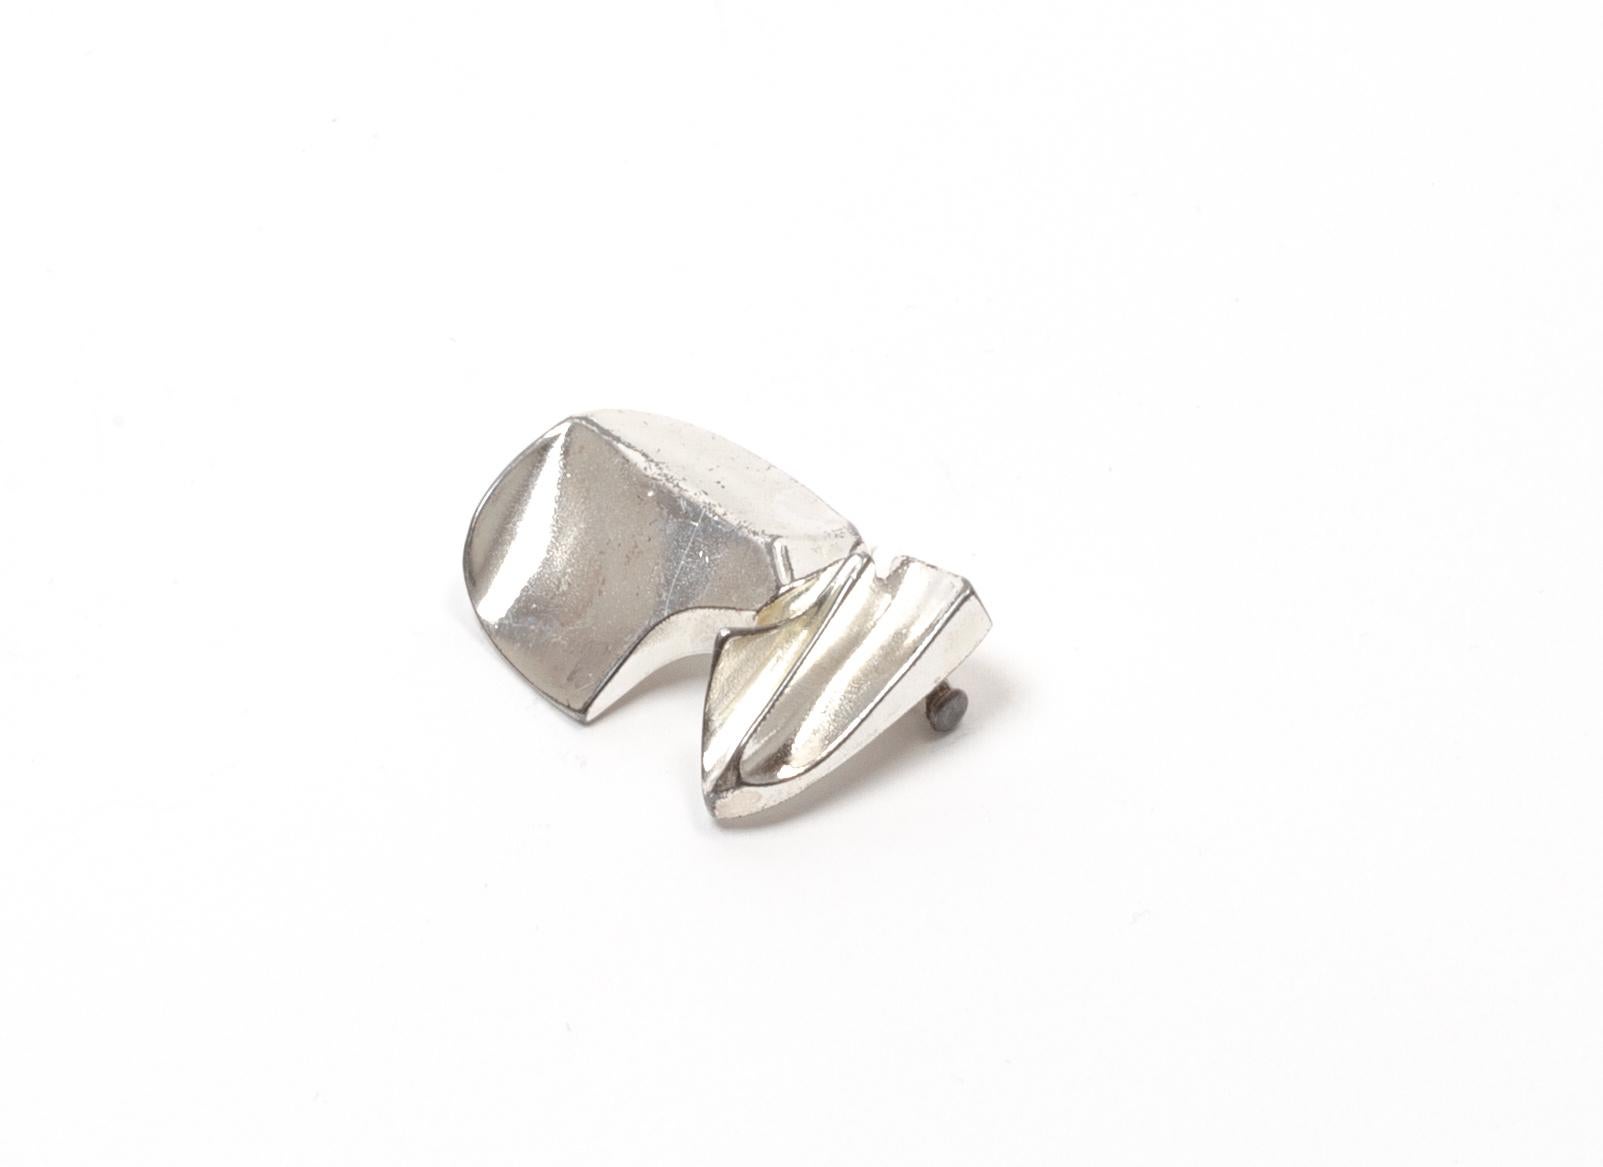 Modernist Scandinavian Silver Brooch by Lapponia In Good Condition For Sale In Oslo, NO